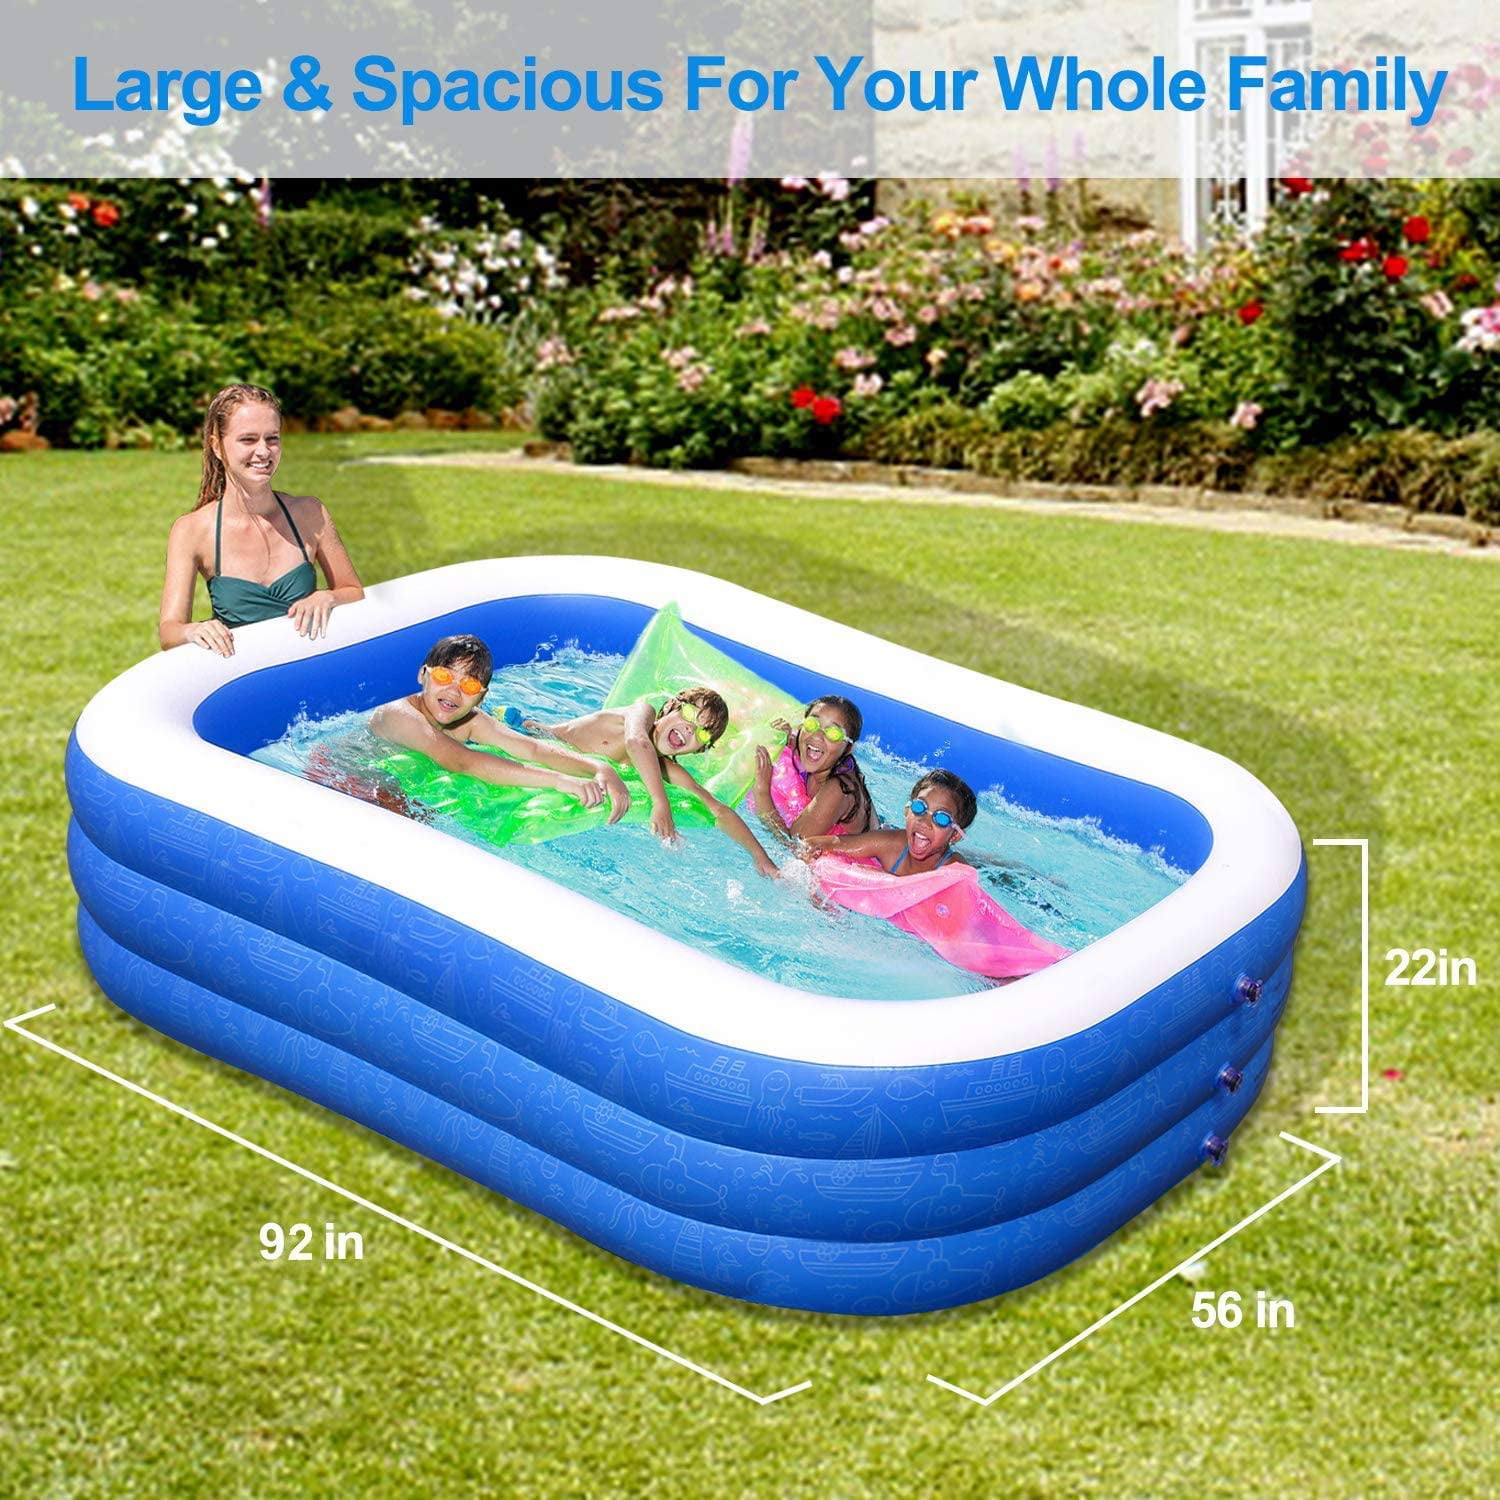 Inflatable Family Swimming Pool GooGo 92" X 56" X 20" by Homech 